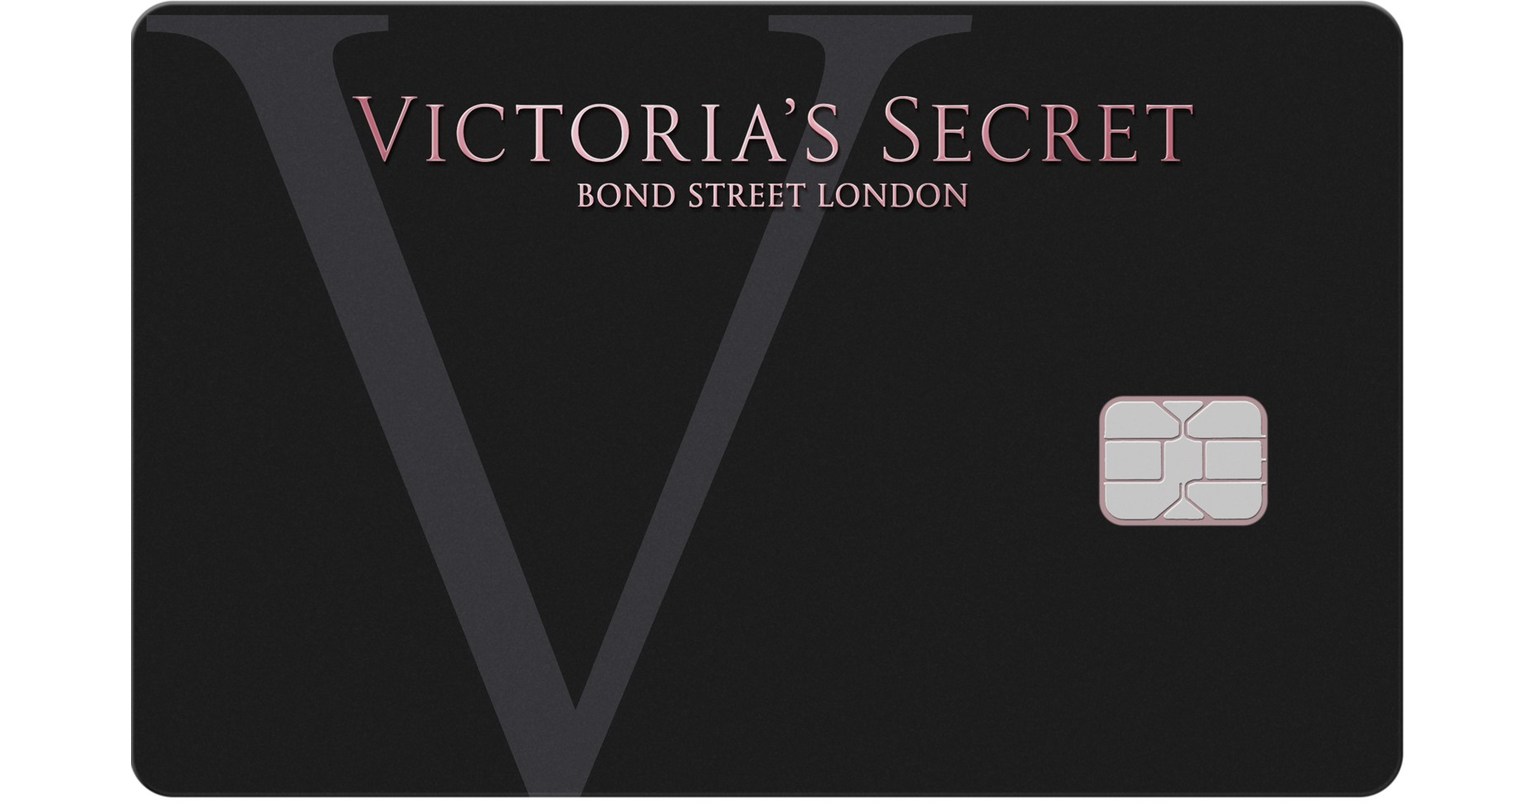 VICTORIA'S SECRET ANGEL Credit Card ~ EVERY COLLECTOR NEEDS ONE! LQQK!